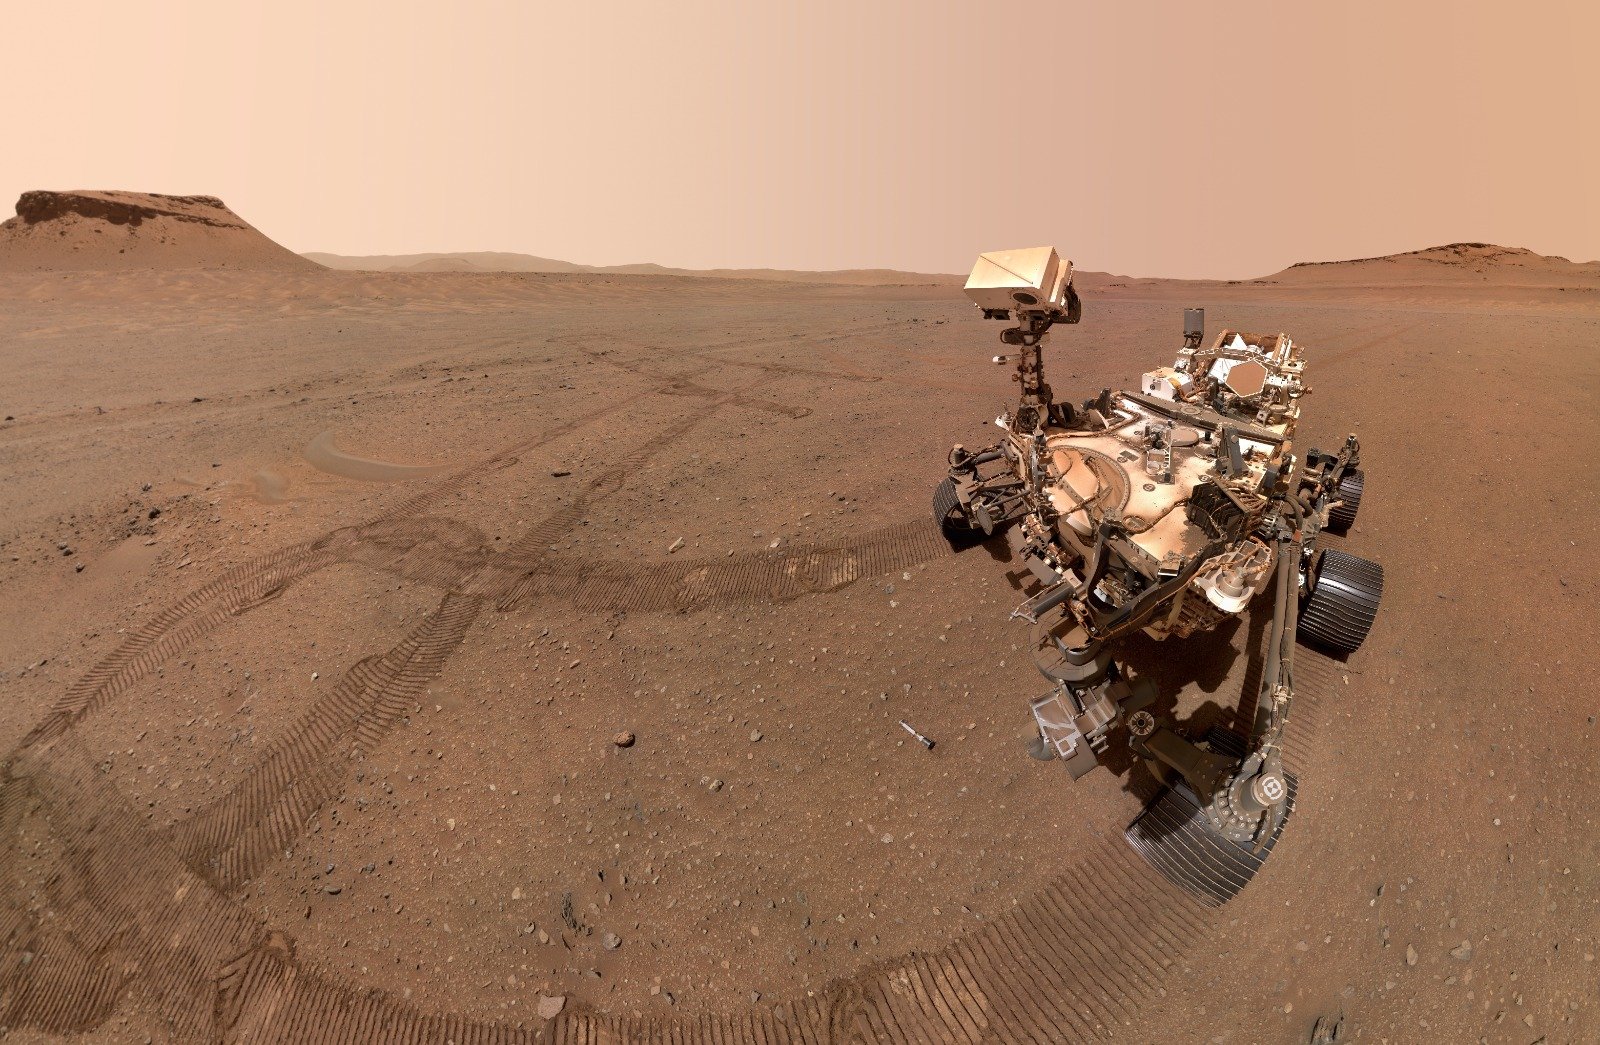 NASA's Perseverance rover can now generate oxygen on Mars